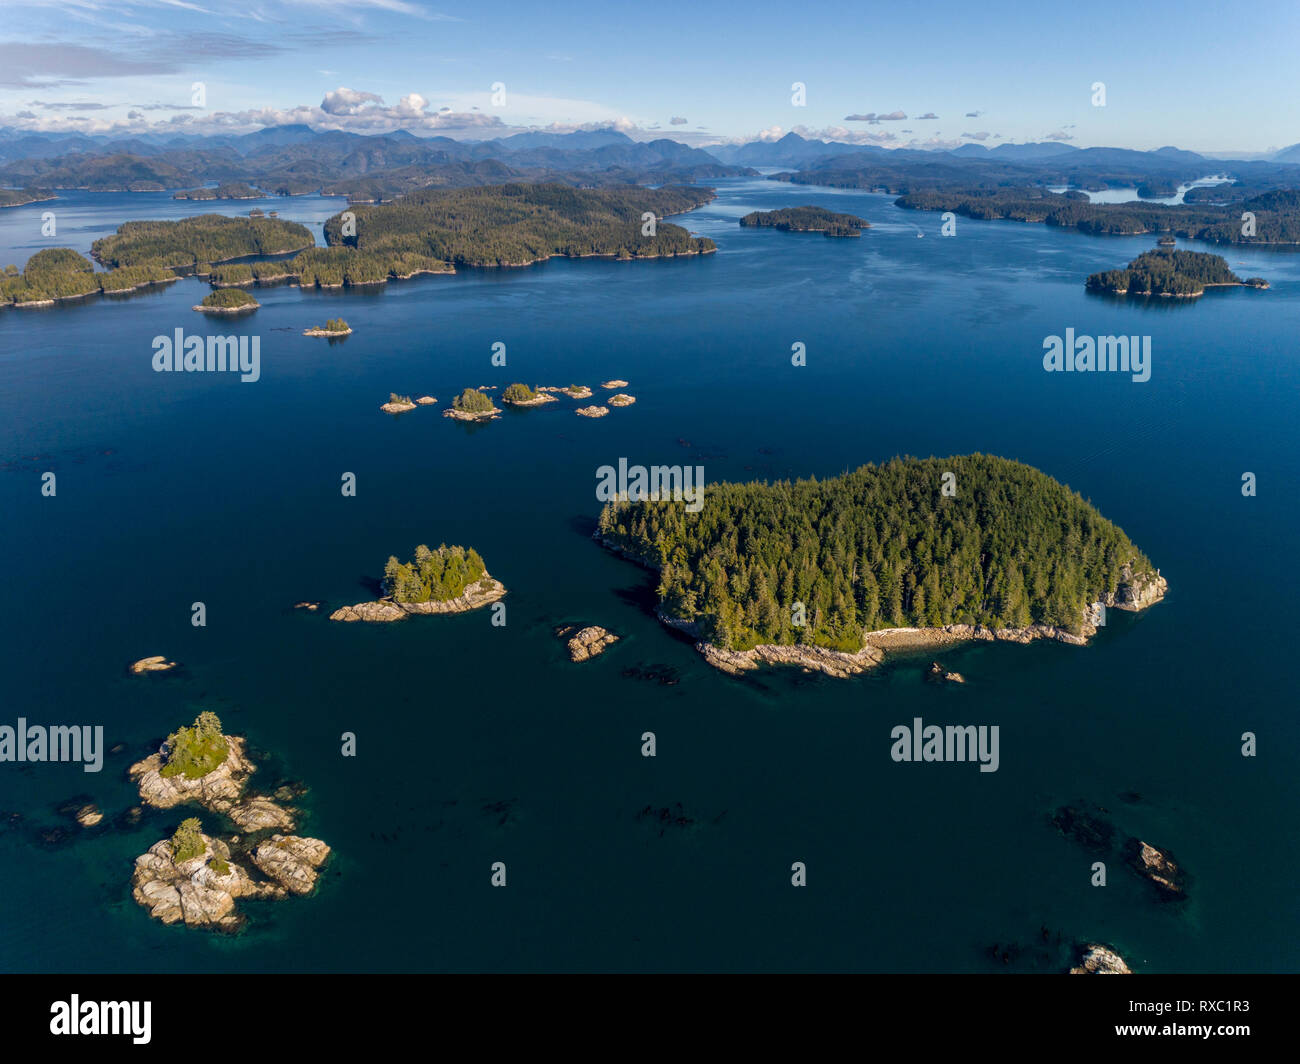 Aerial photograph of the Broughton Archipelago Marine Park and the entrance of Knight Inlet, First Nations Territory, British Columbia, Canada. Stock Photo